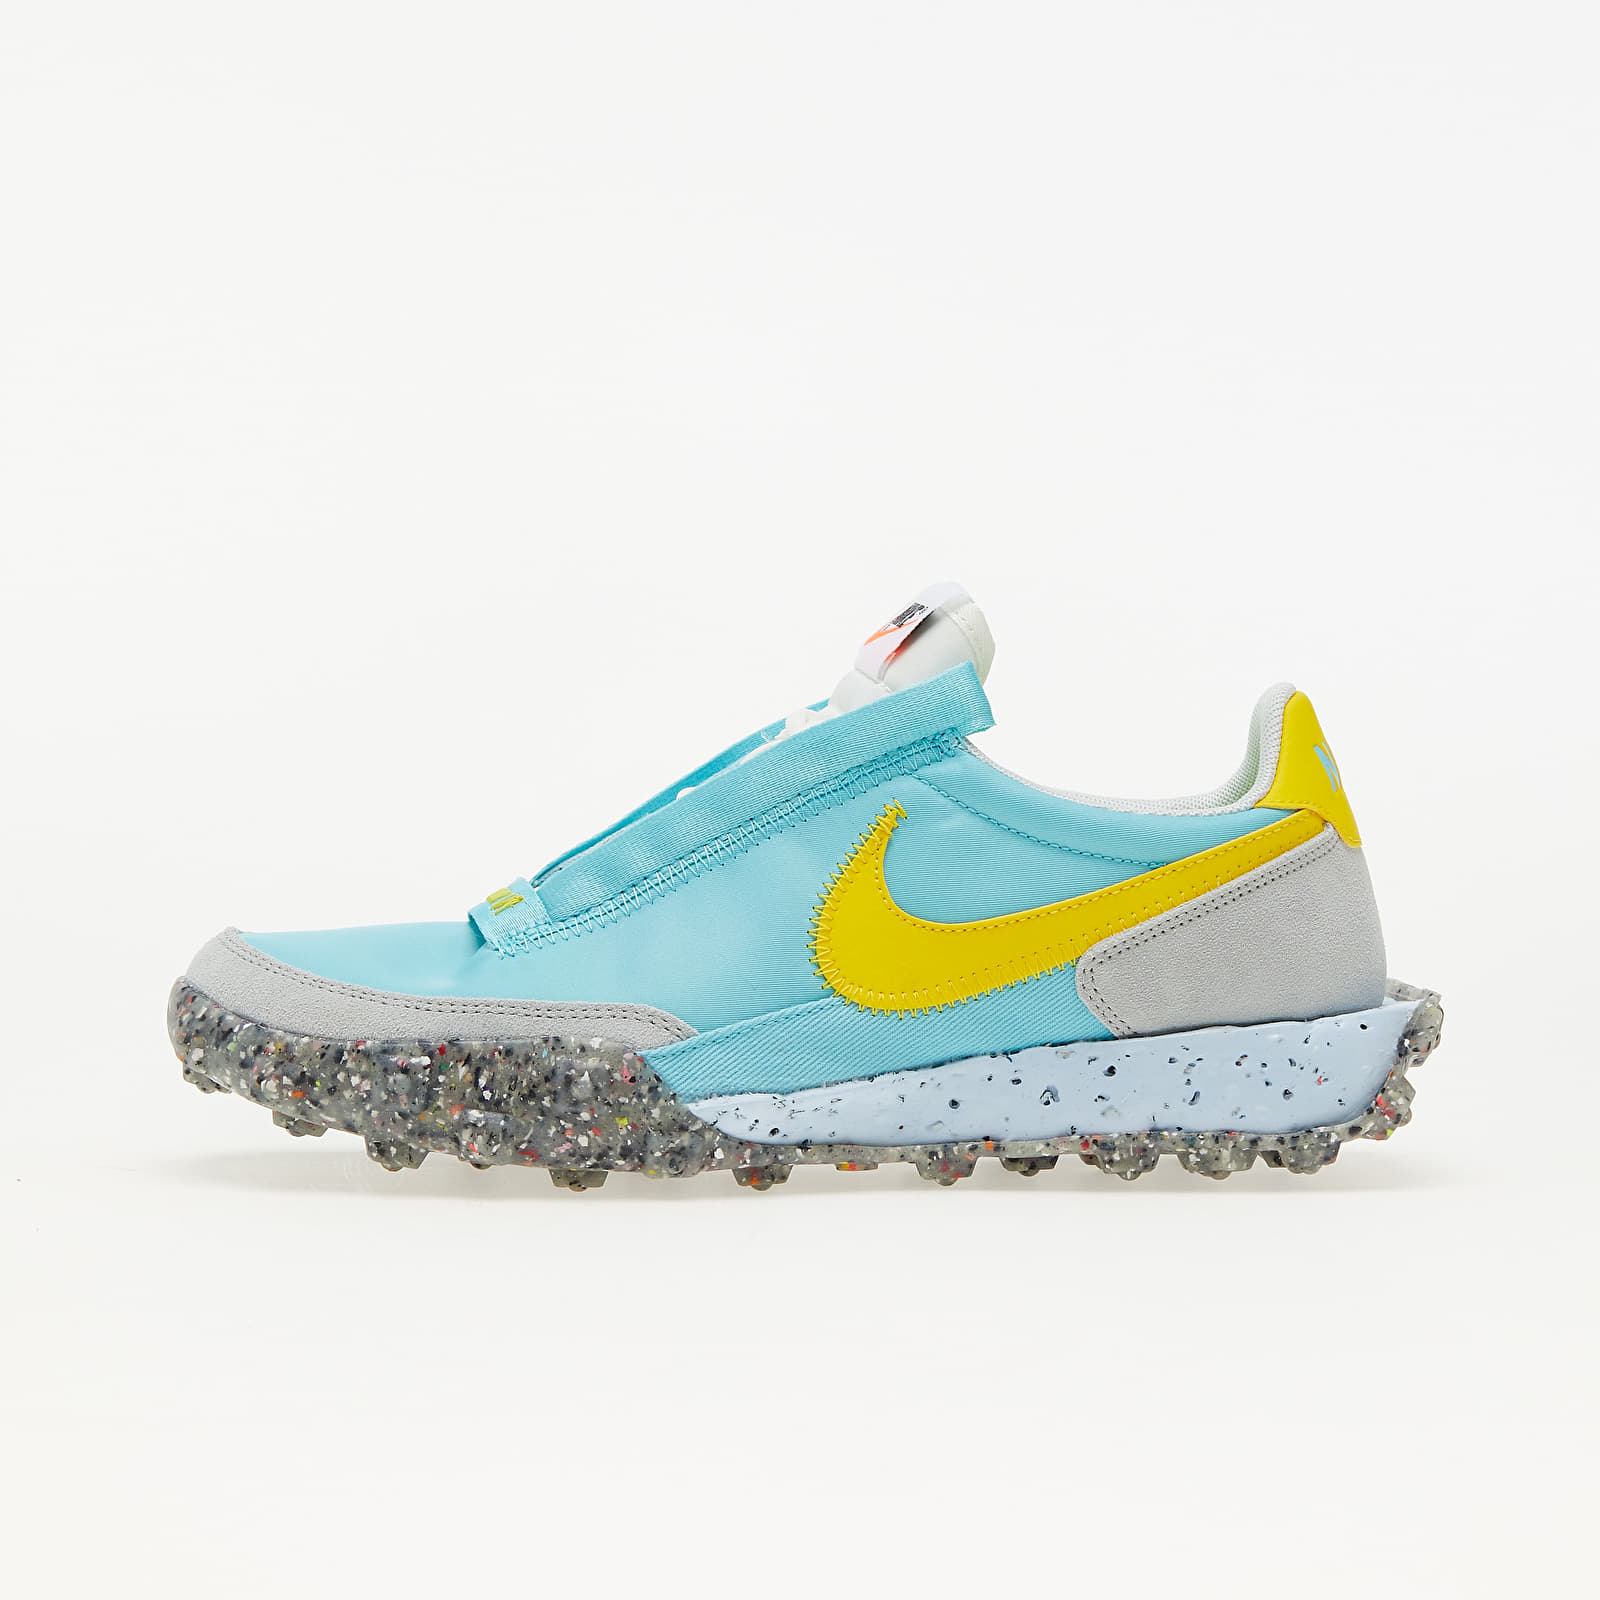 Chaussures et baskets femme Nike W Waffle Racer Crater Bleached Aqua/ Speed Yellow-Sail